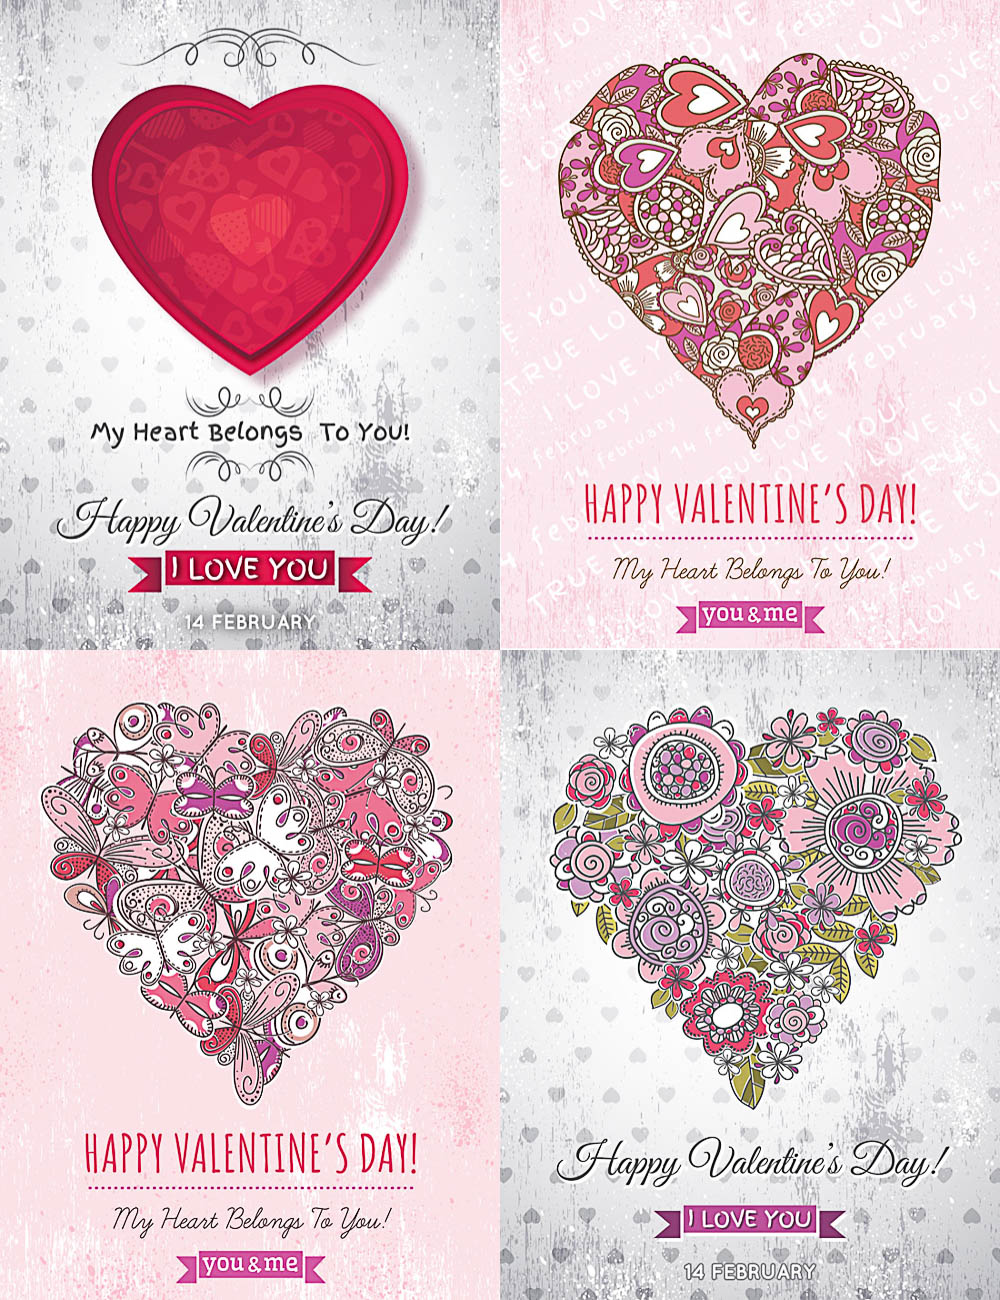 Postcards to the Valentine's Day with hearts vector